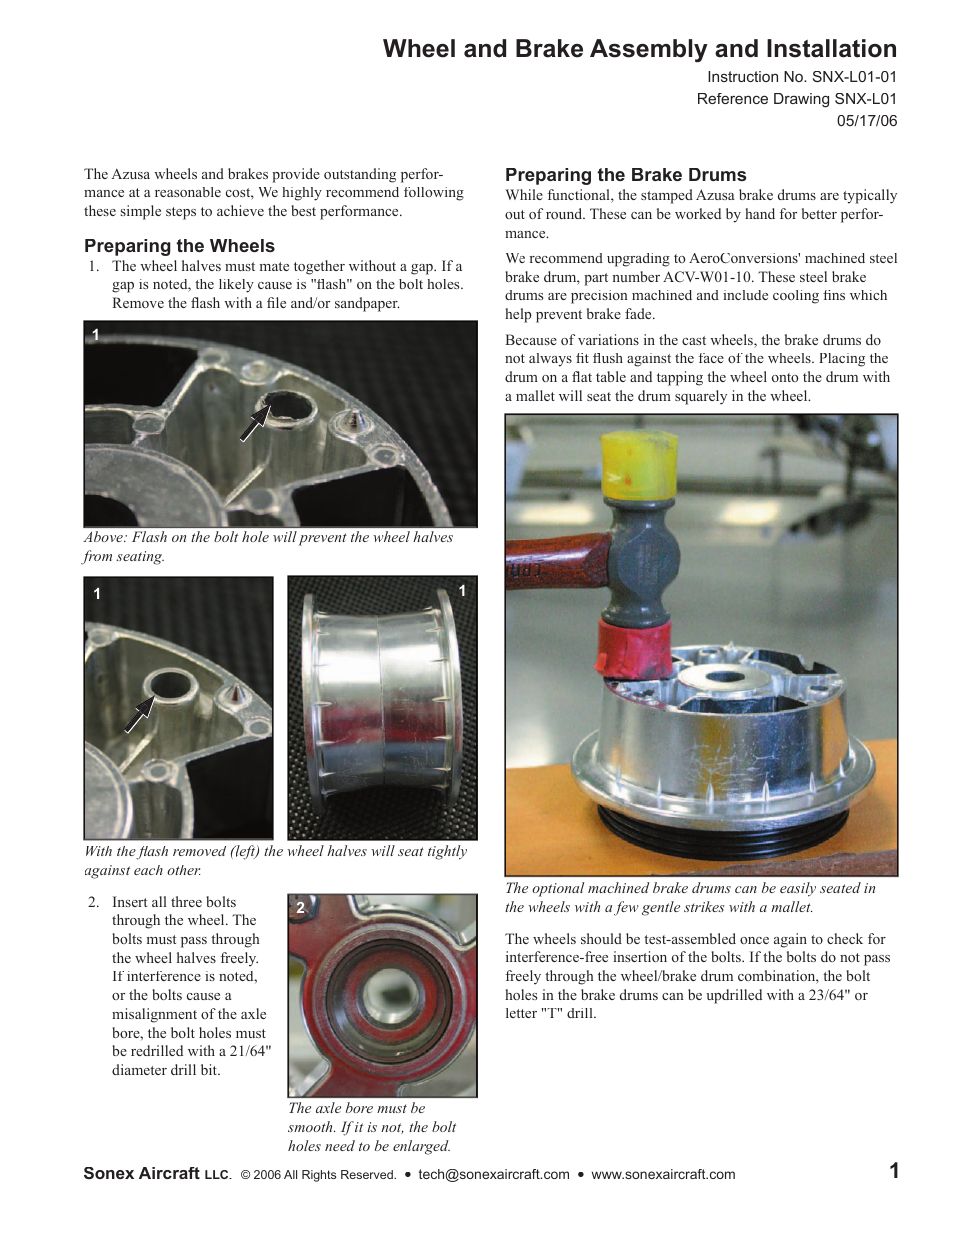 Wheel and Brake Assembly and Installation Instructions